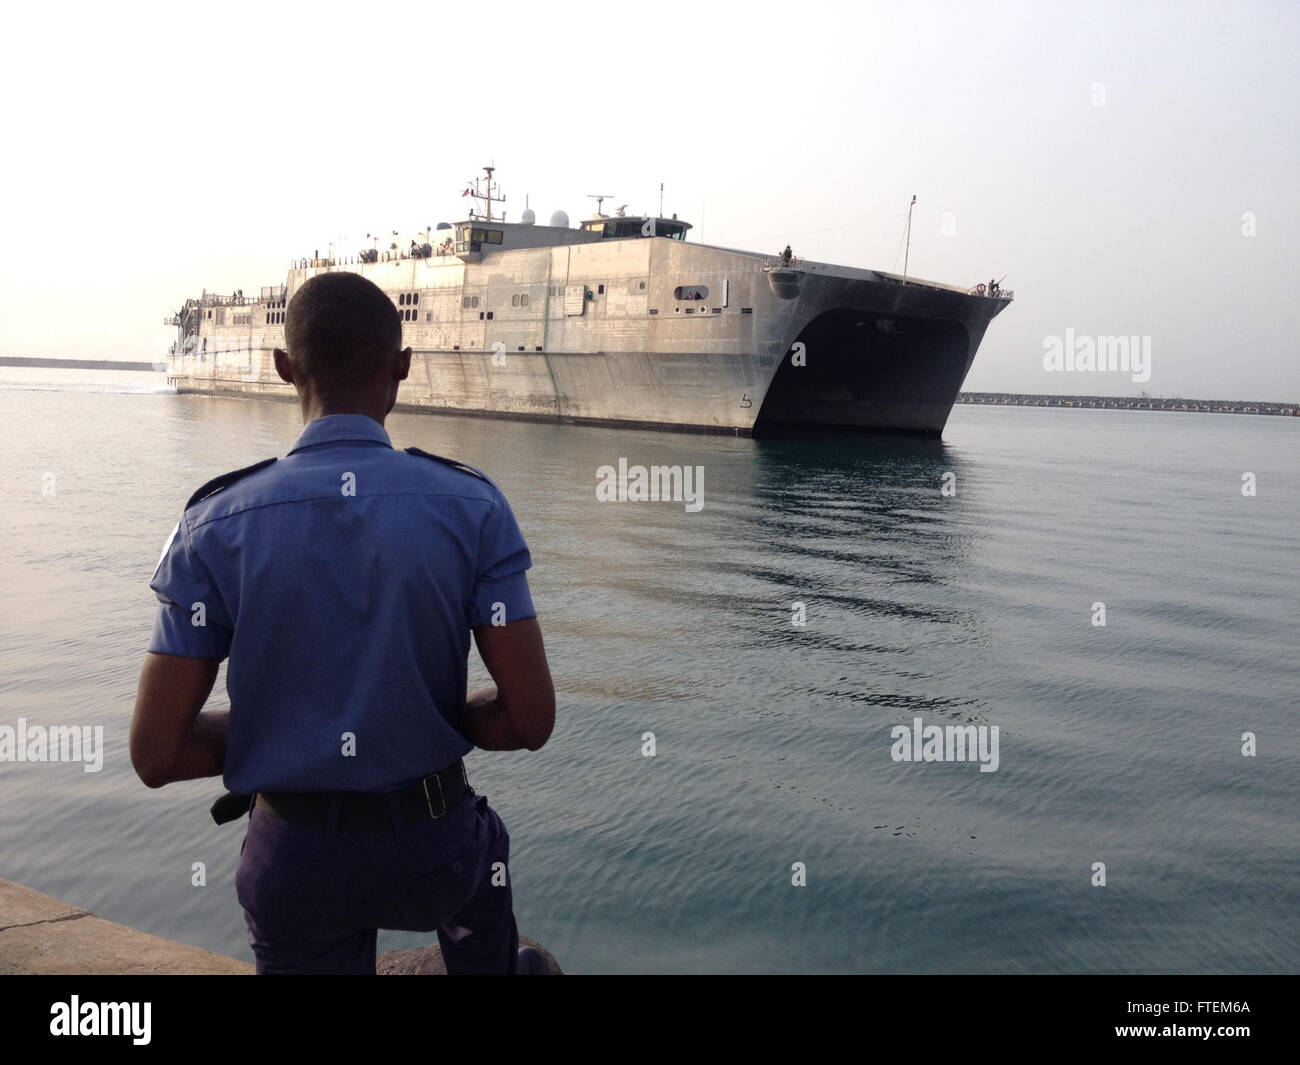 SECONDI NAVAL BASE, Ghana (Feb. 24, 2015) A Ghanaian military member stands by as the Military Sealift Command's joint high-speed vessel USNS Spearhead (JHSV 1) moors at Sekondi Naval Base, Ghana, after completing Africa Maritime Law Enforcement Partnership operations Feb. 24, 2015. Spearhead is on a scheduled deployment to the U.S. 6th Fleet area of operations in support of the international collaborative capacity-building program Africa Partnership Station. Stock Photo